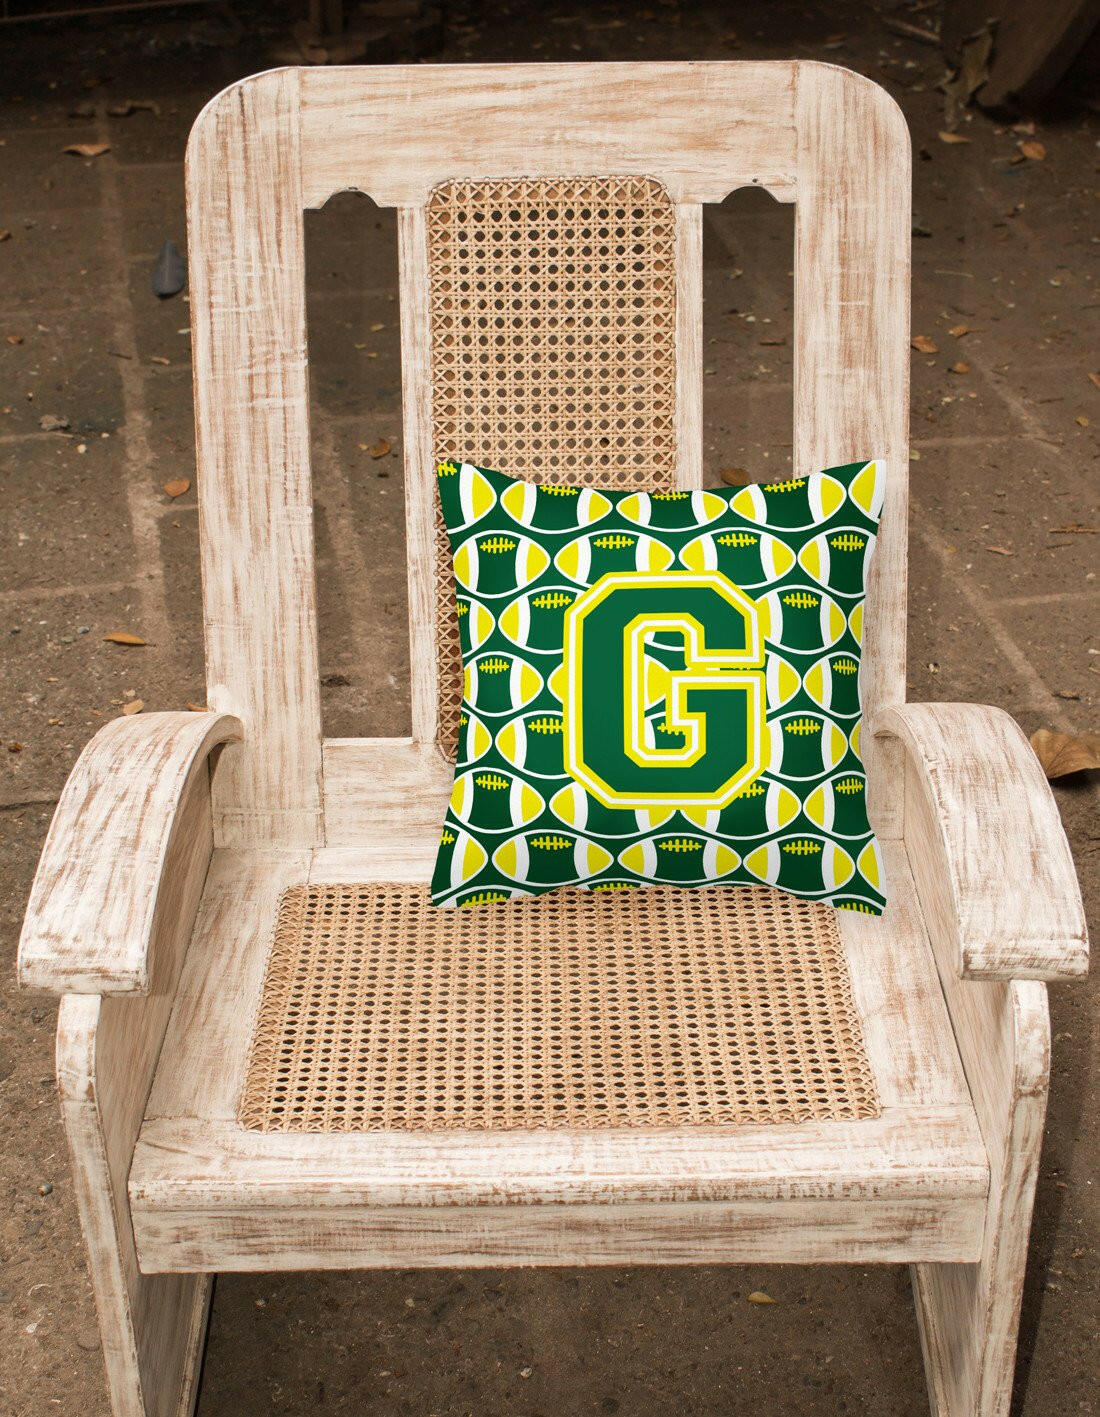 Letter G Football Green and Yellow Fabric Decorative Pillow CJ1075-GPW1414 by Caroline's Treasures